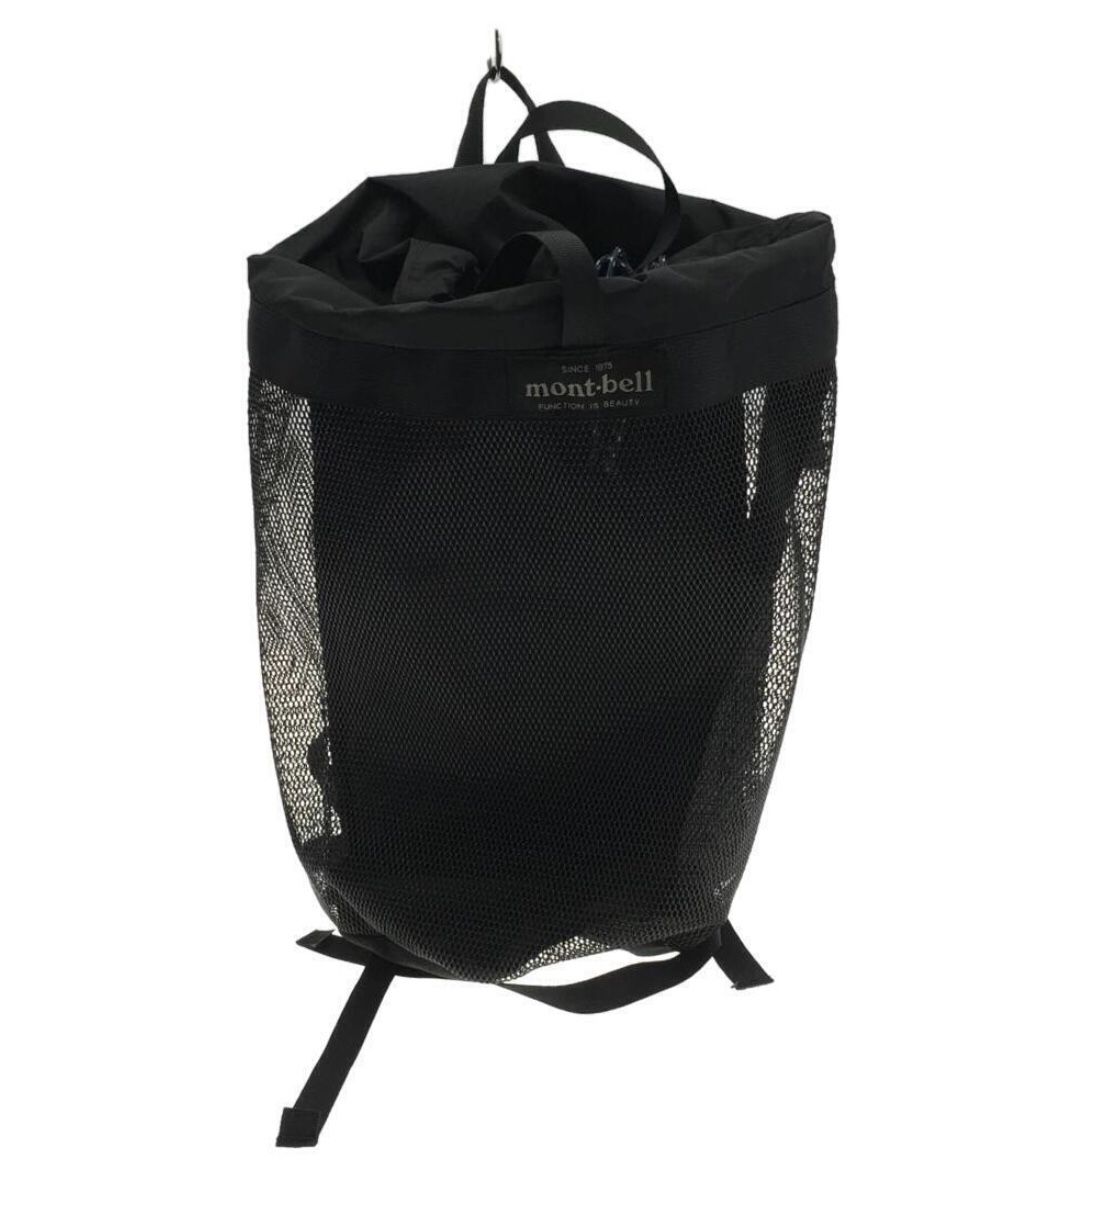 Mont bell Mesh Gear Container 50 (Backpack)